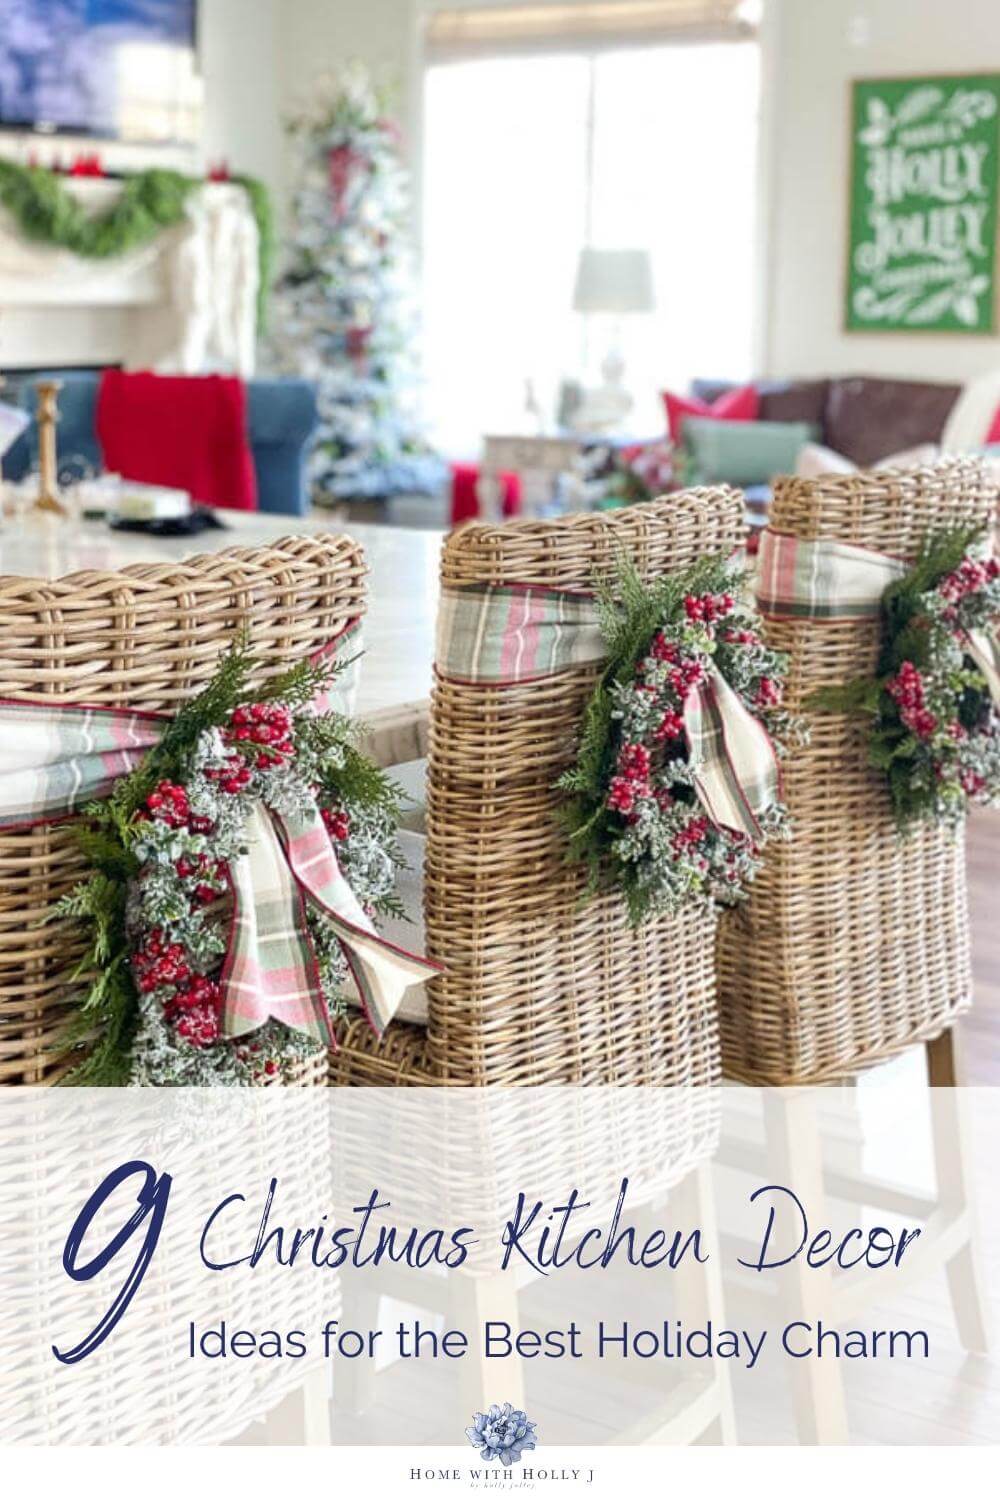 Want to give your kitchen a little holiday makeover this year? Check out my favorite Christmas kitchen decor ideas with pops of red and green.